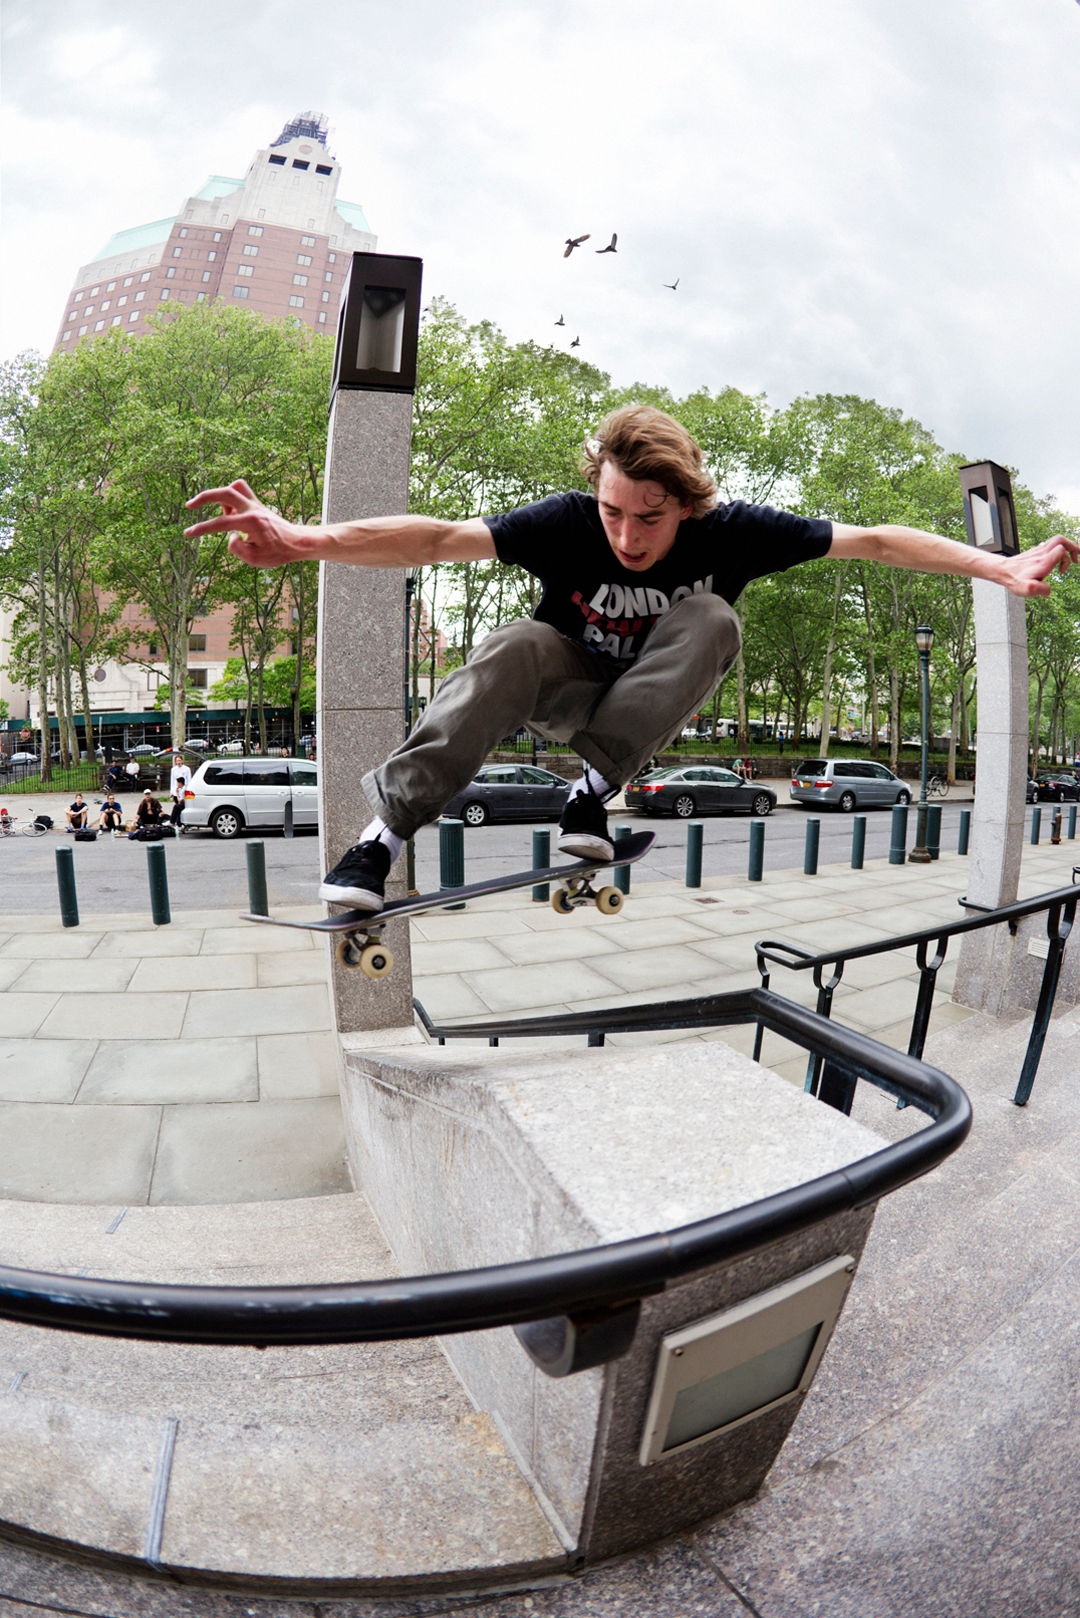 And Rory Milanes gets down with the backside 180